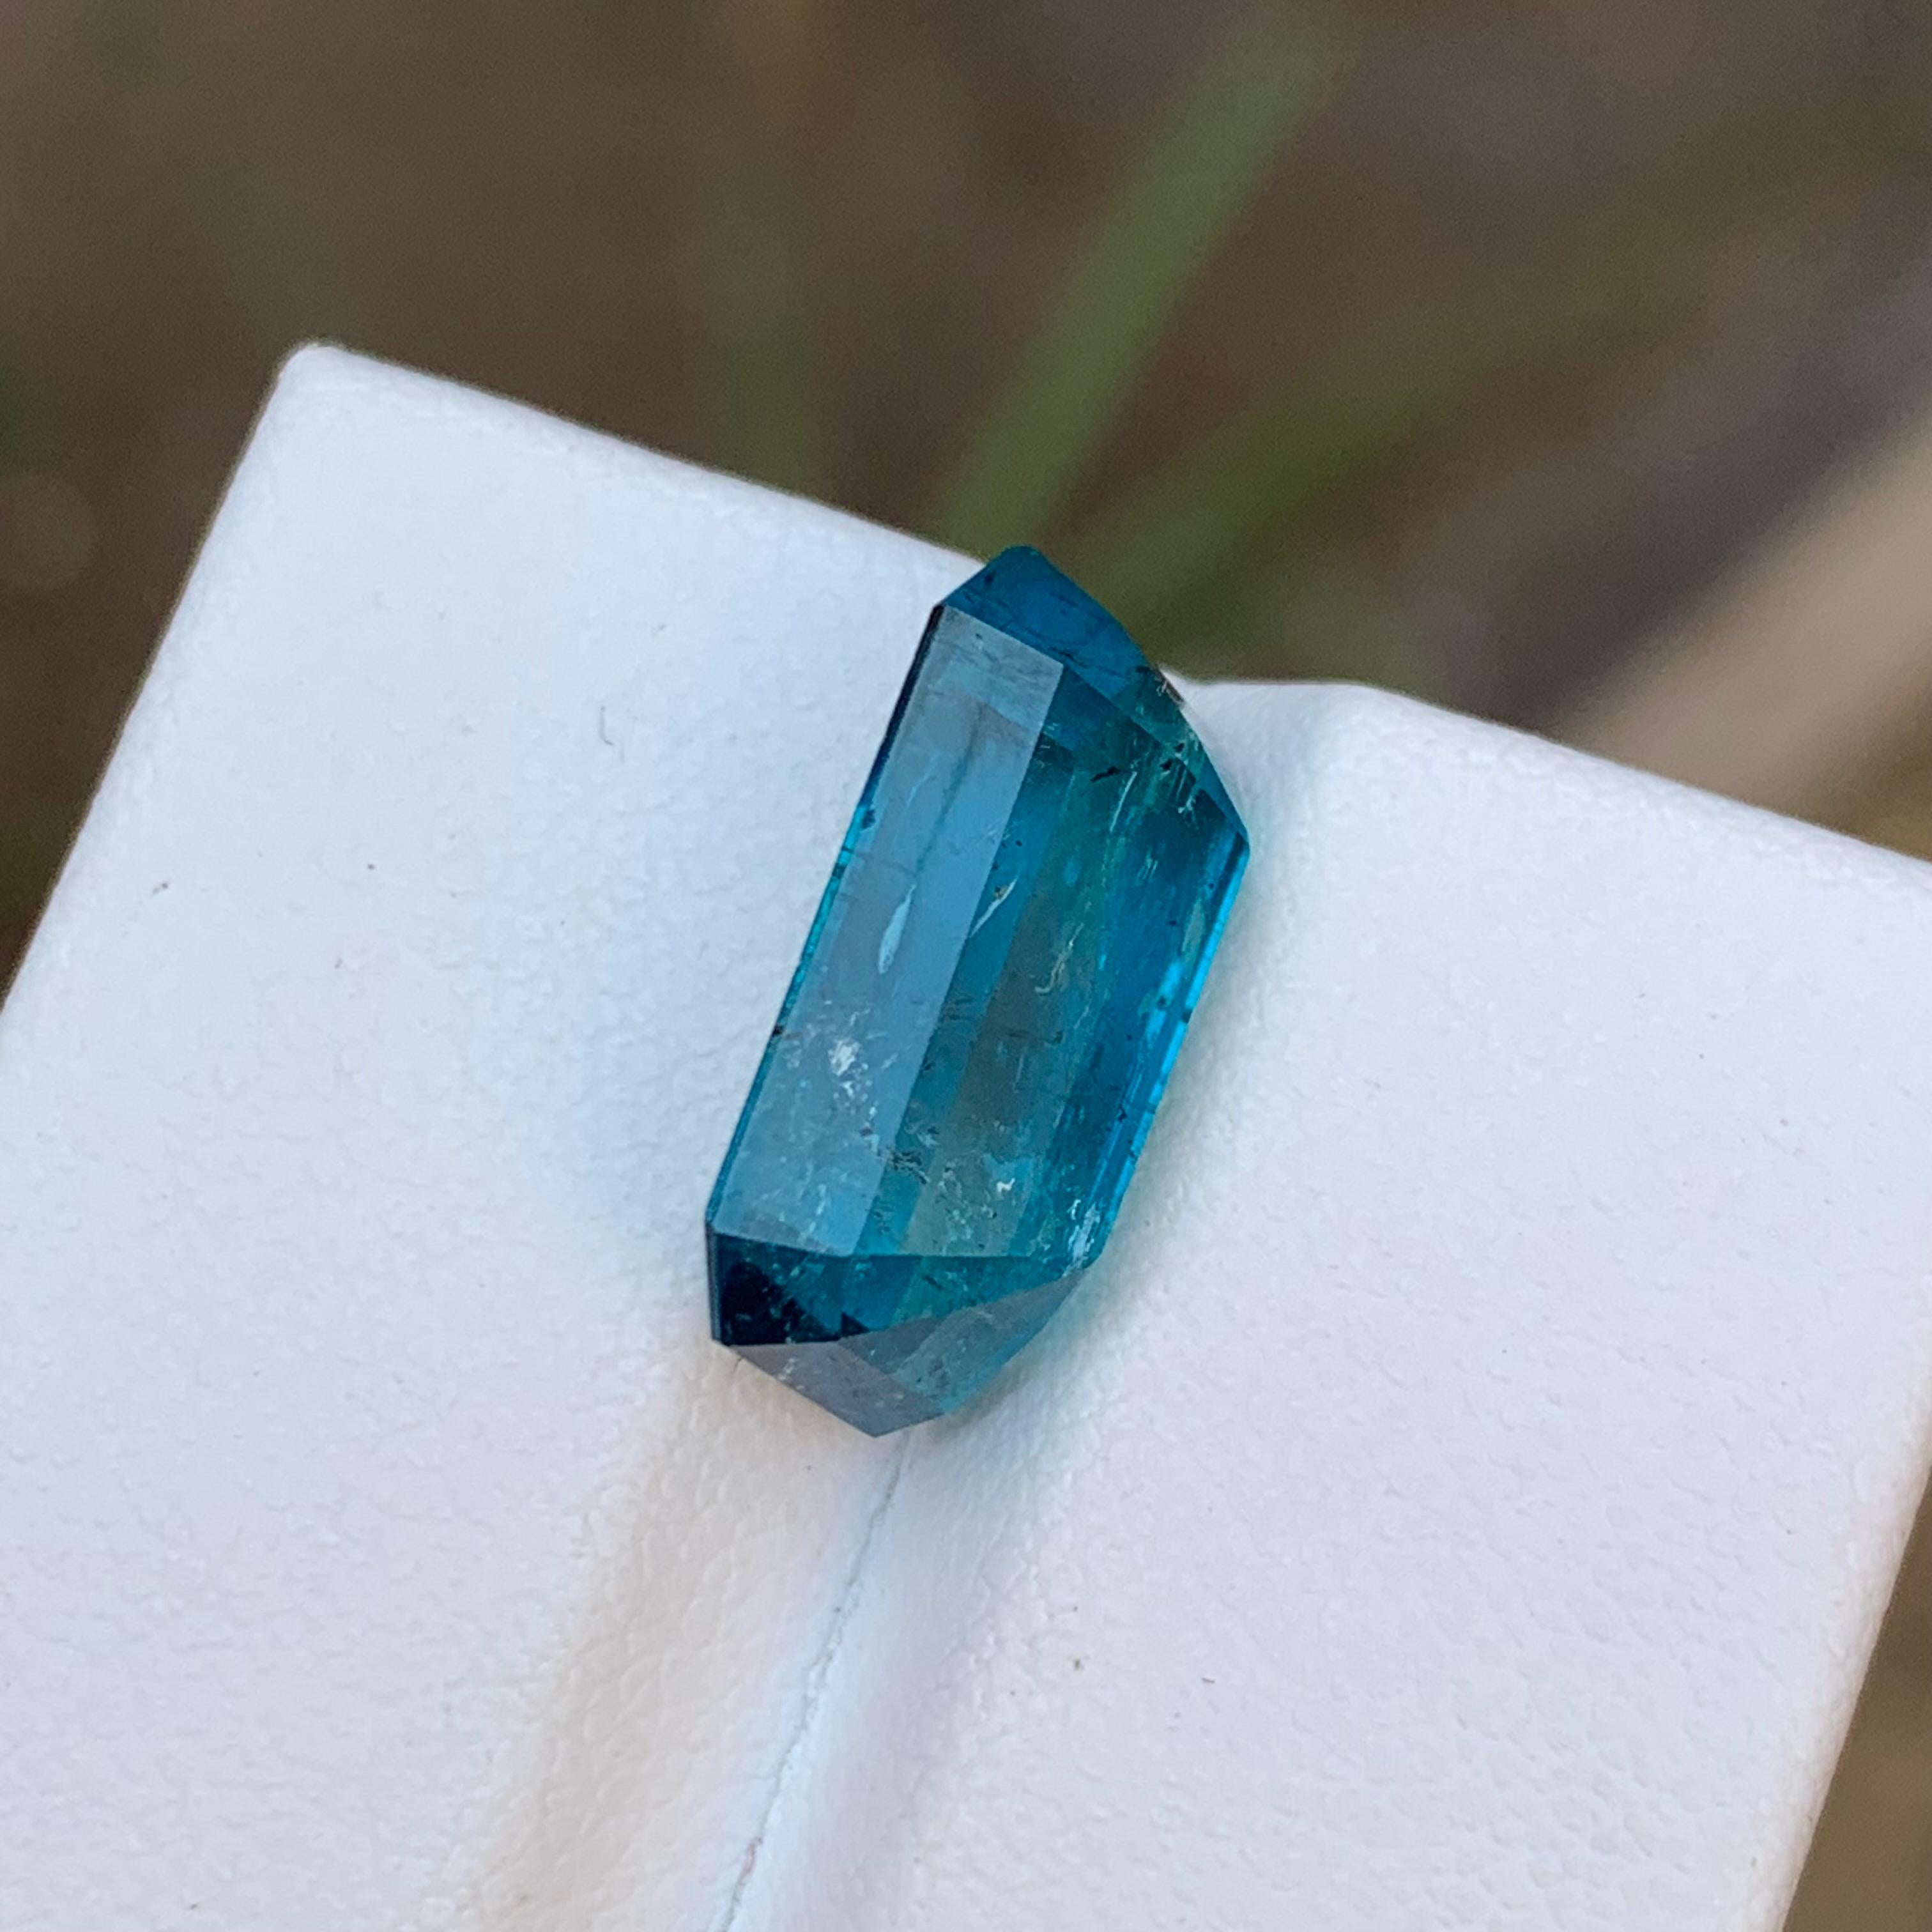 Rare Rich Electric Blue Tourmaline Gemstone 7.20 Ct Emerald Cut for Ring/Pendant For Sale 1